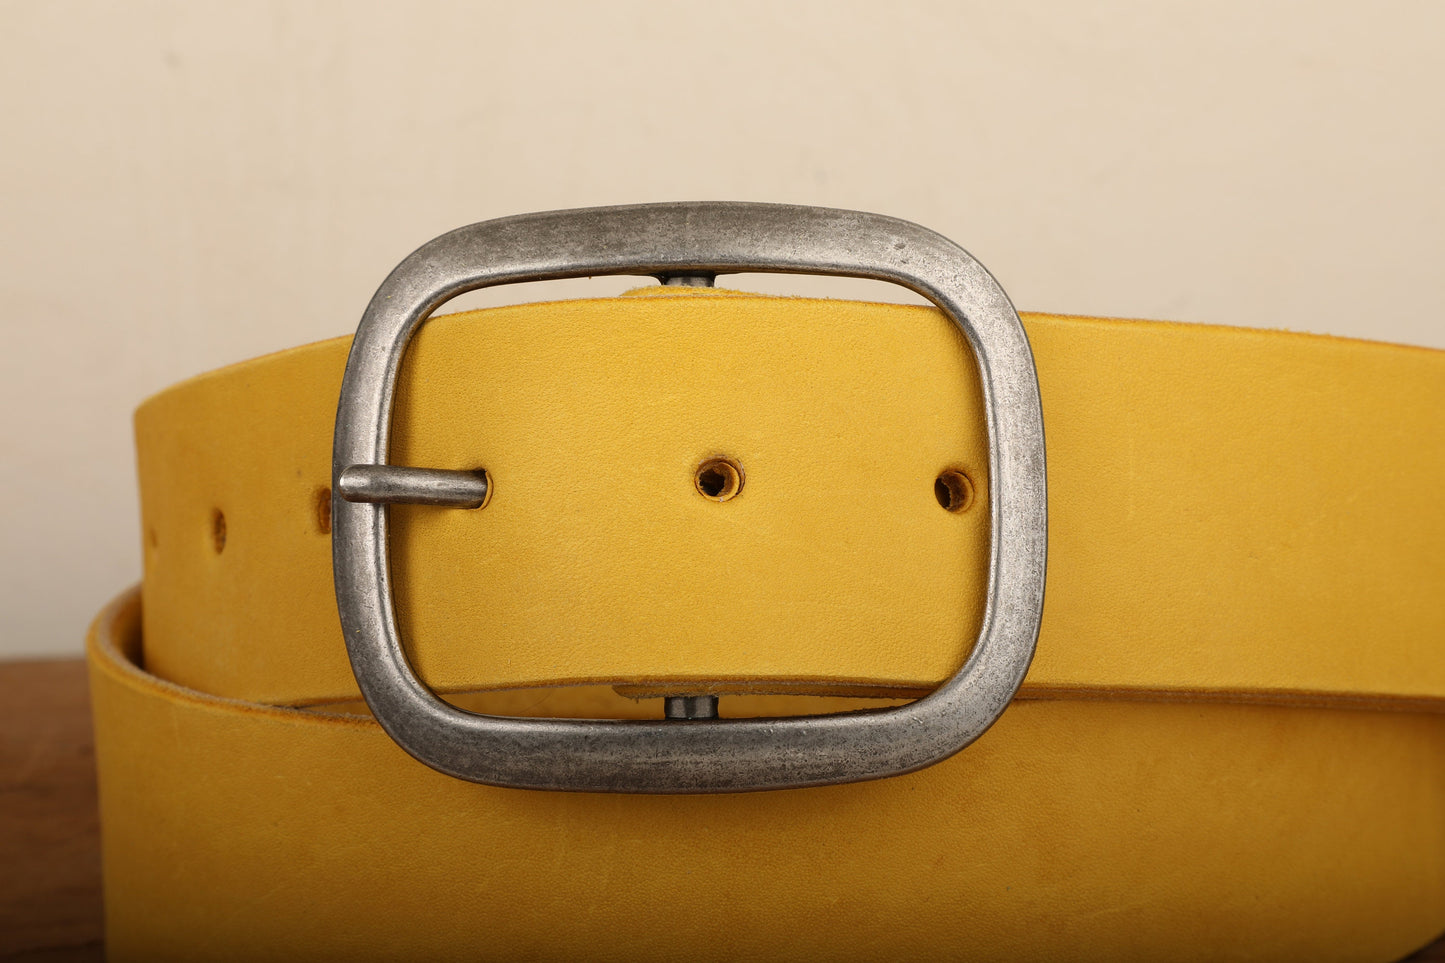 Yellow Leather Belt Snap Closure with Antique Silver Toned Nickel Buckle